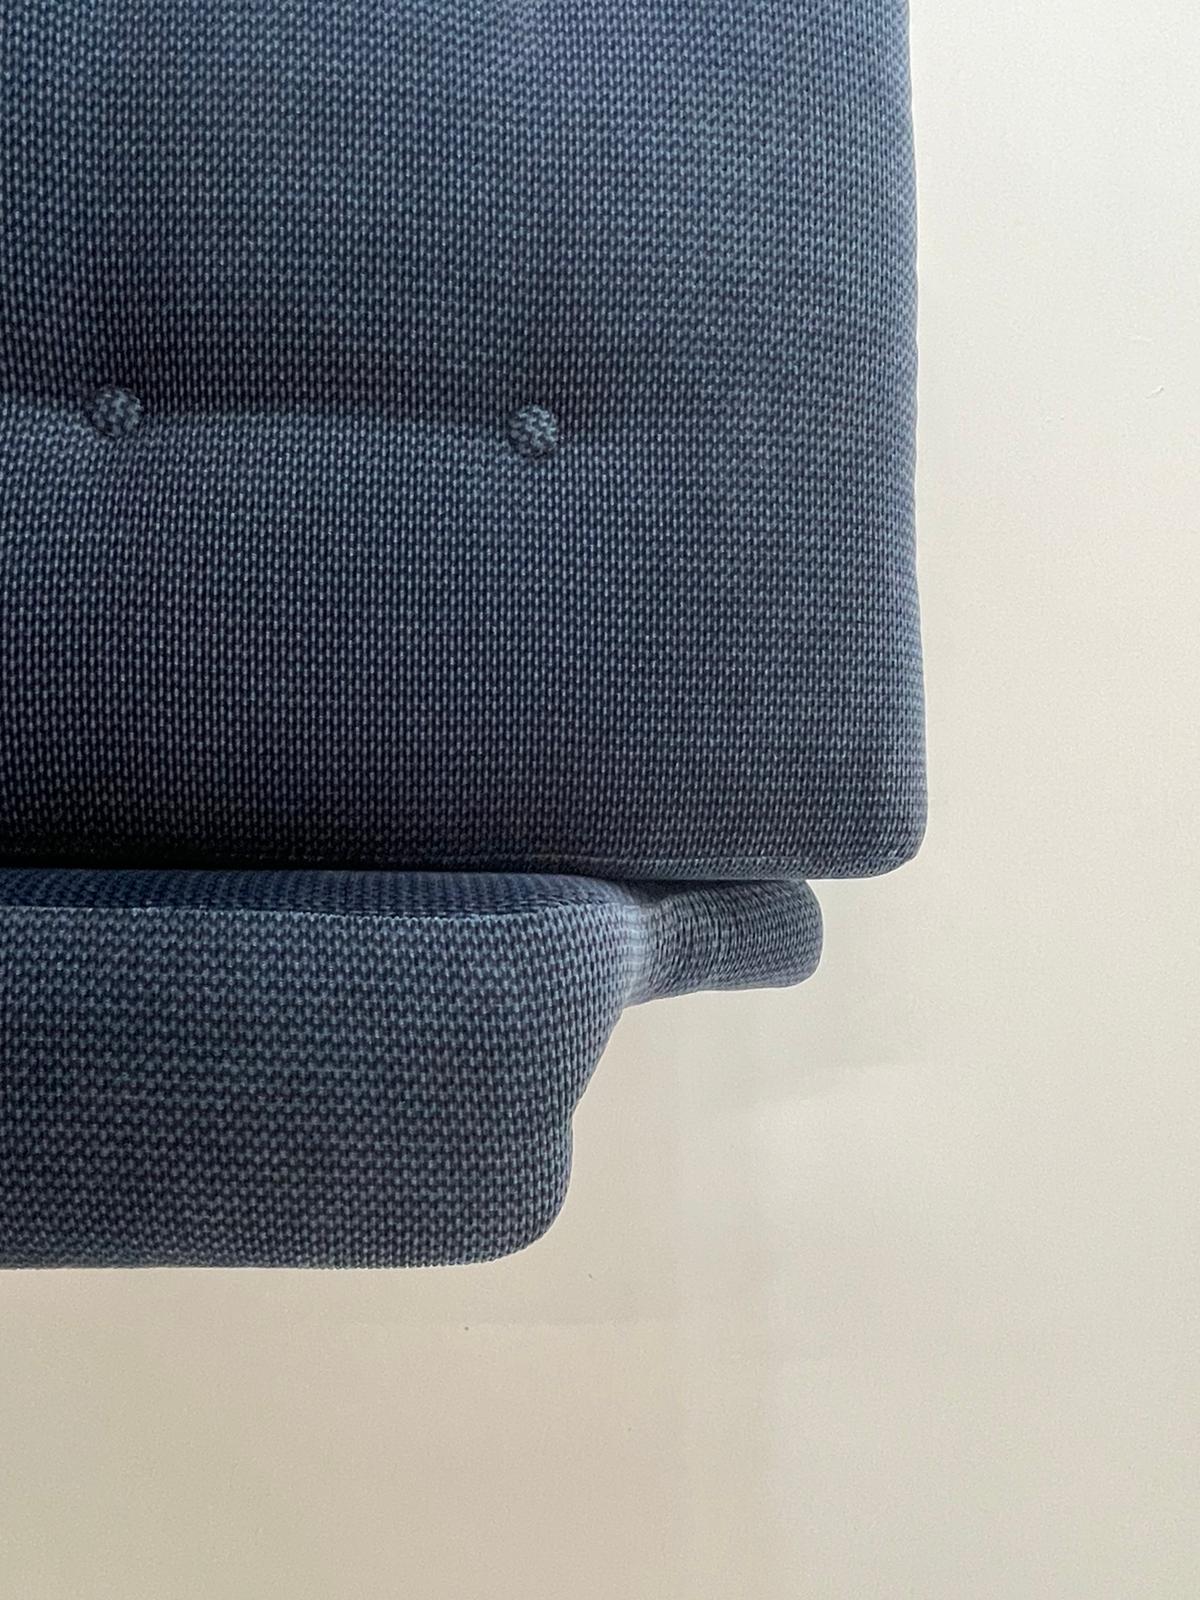 Marco Zanuso for Arflex, pair of armchairs, 'Regent' model, blue velvet by Nobilis Paris, metal, wood, Italy, design 1960s.
Beautiful pair of Regent lounge armchairs designed by Marco Zanuso in 1960. Characteristic of this model are the outward